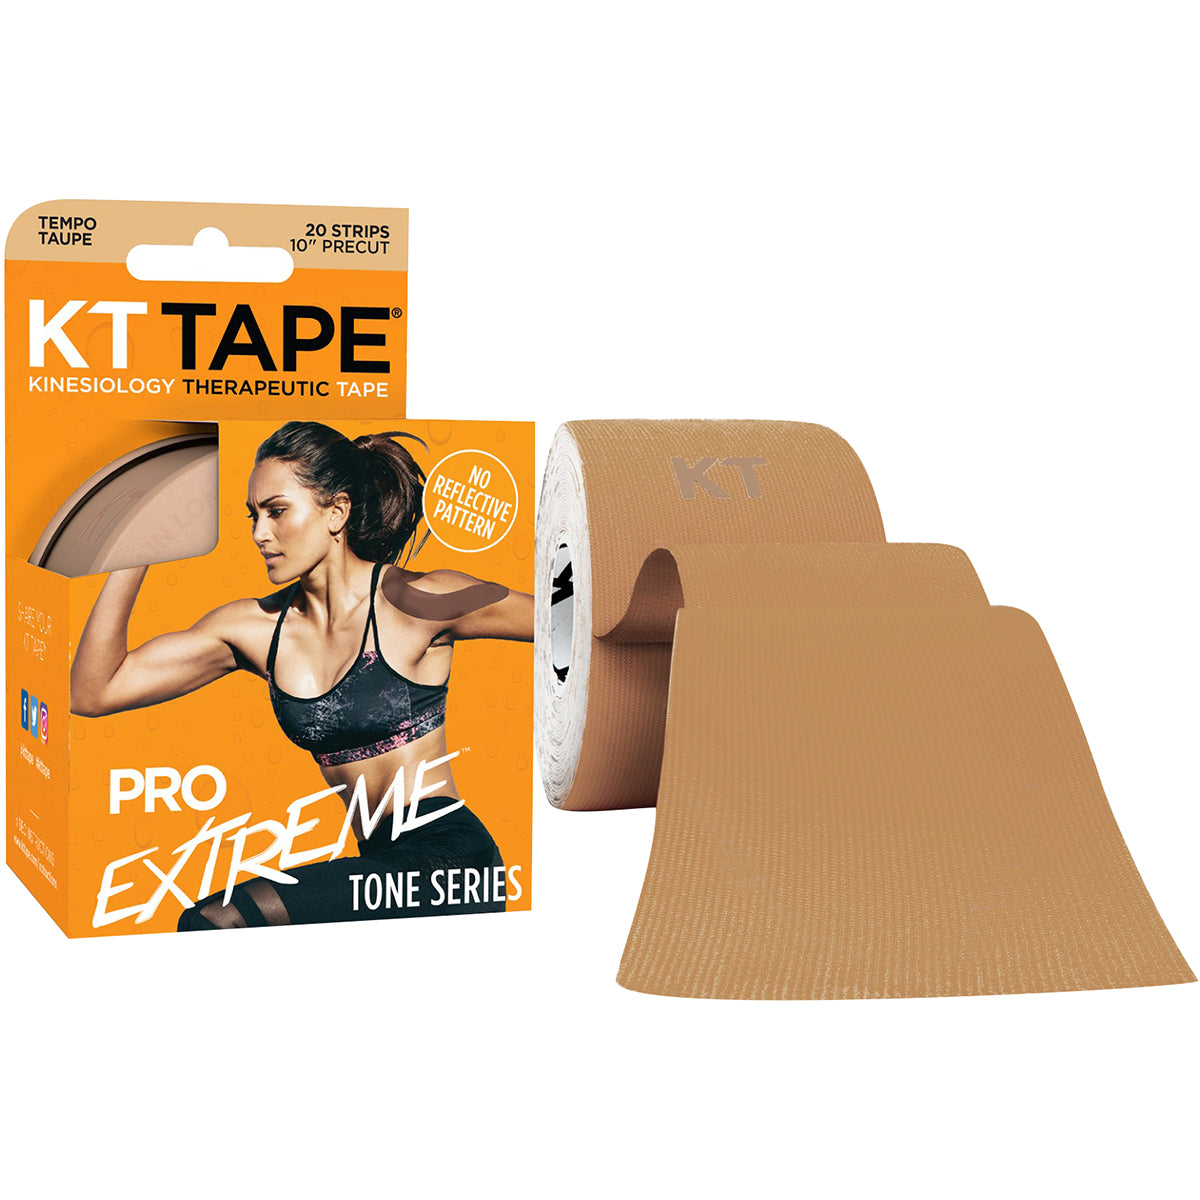 KT Tape Pro Extreme Tone Series 10" Precut Kinesiology Sports Roll - 20 Strips KT Tape